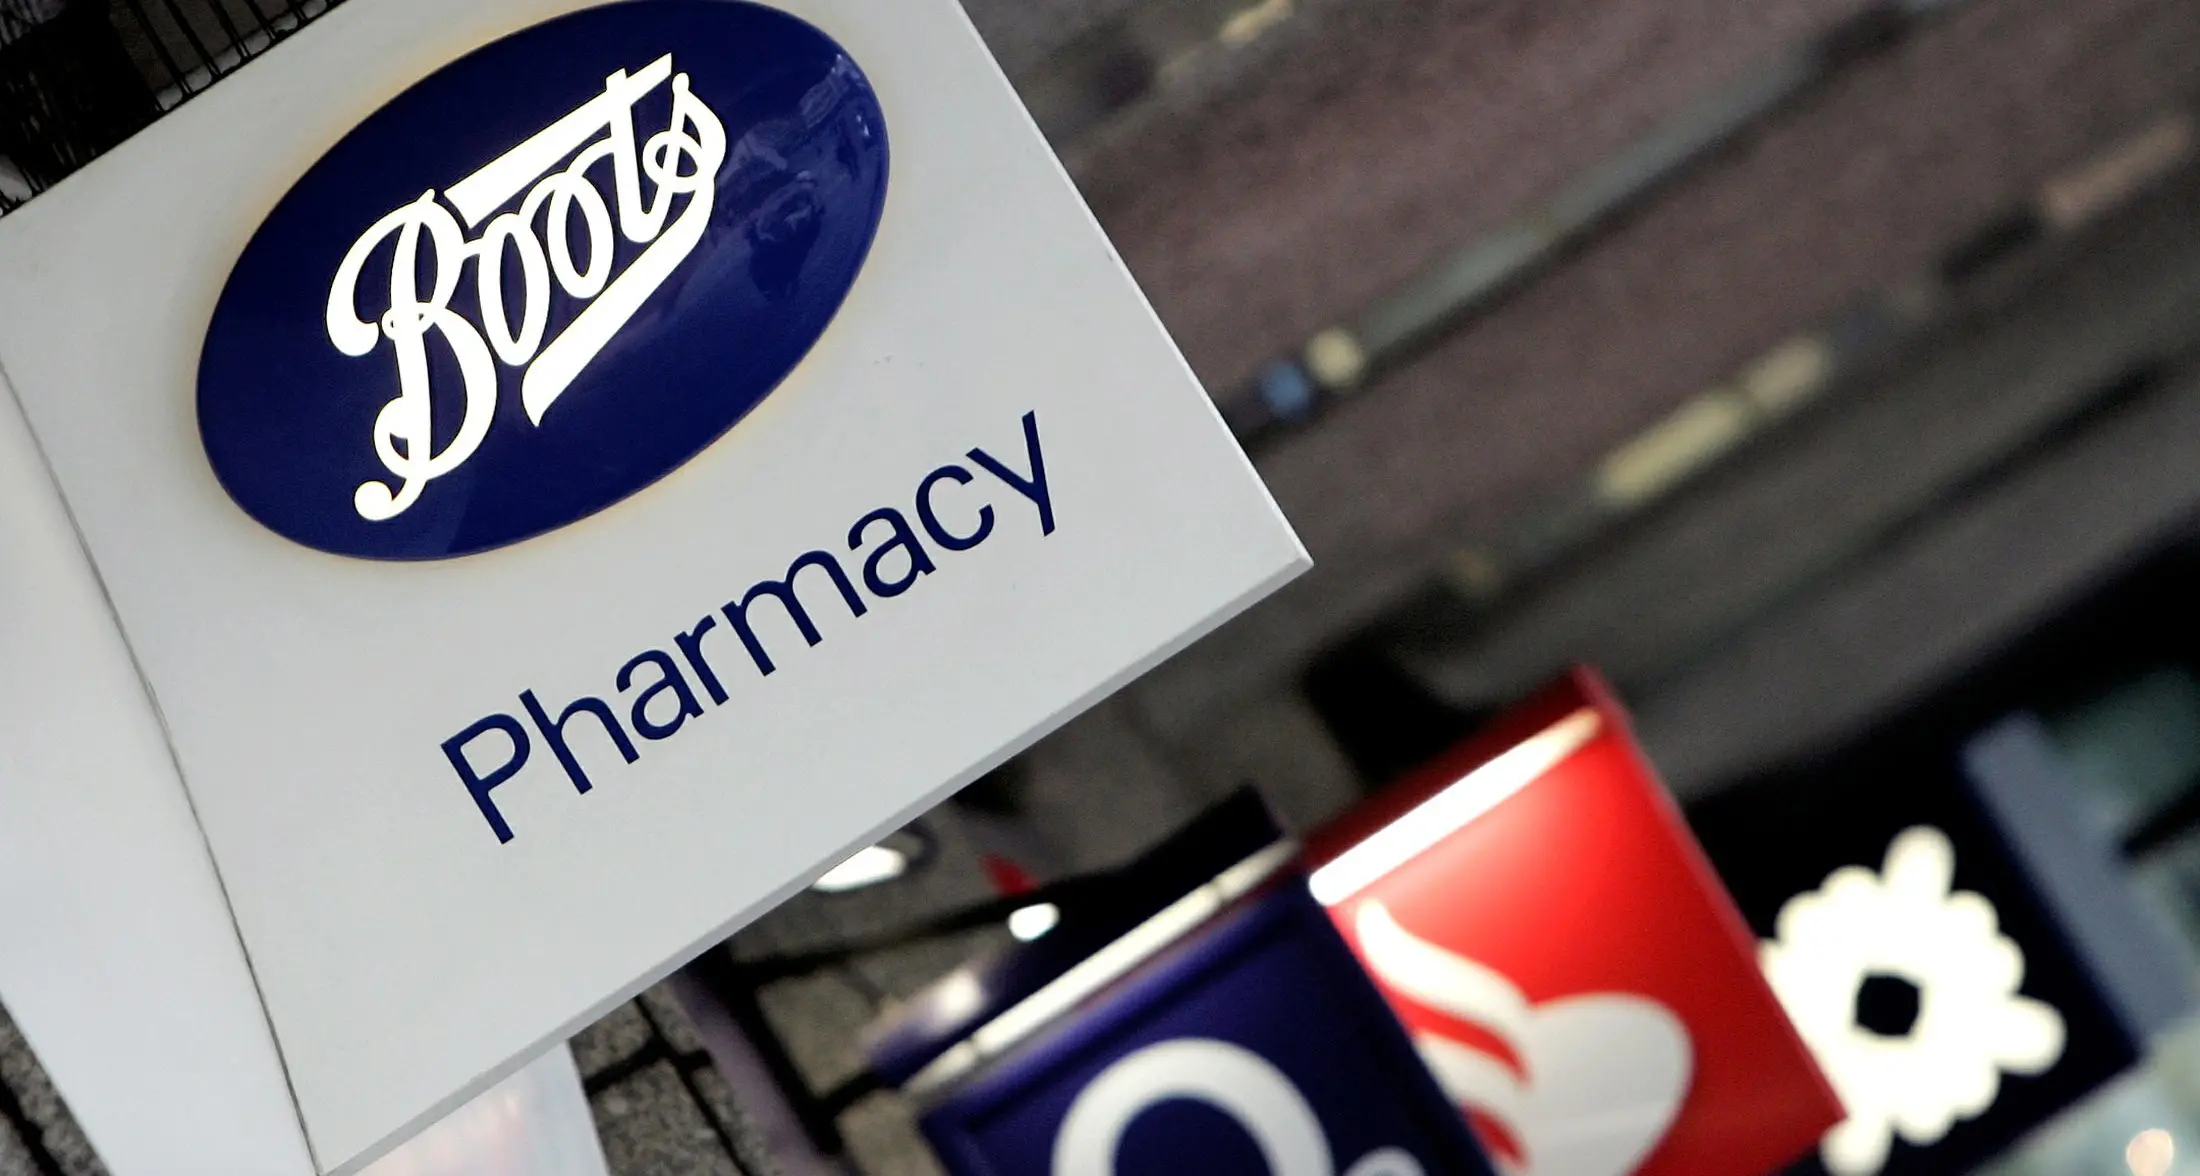 Boots in store for $10bln sale as bid deadline looms